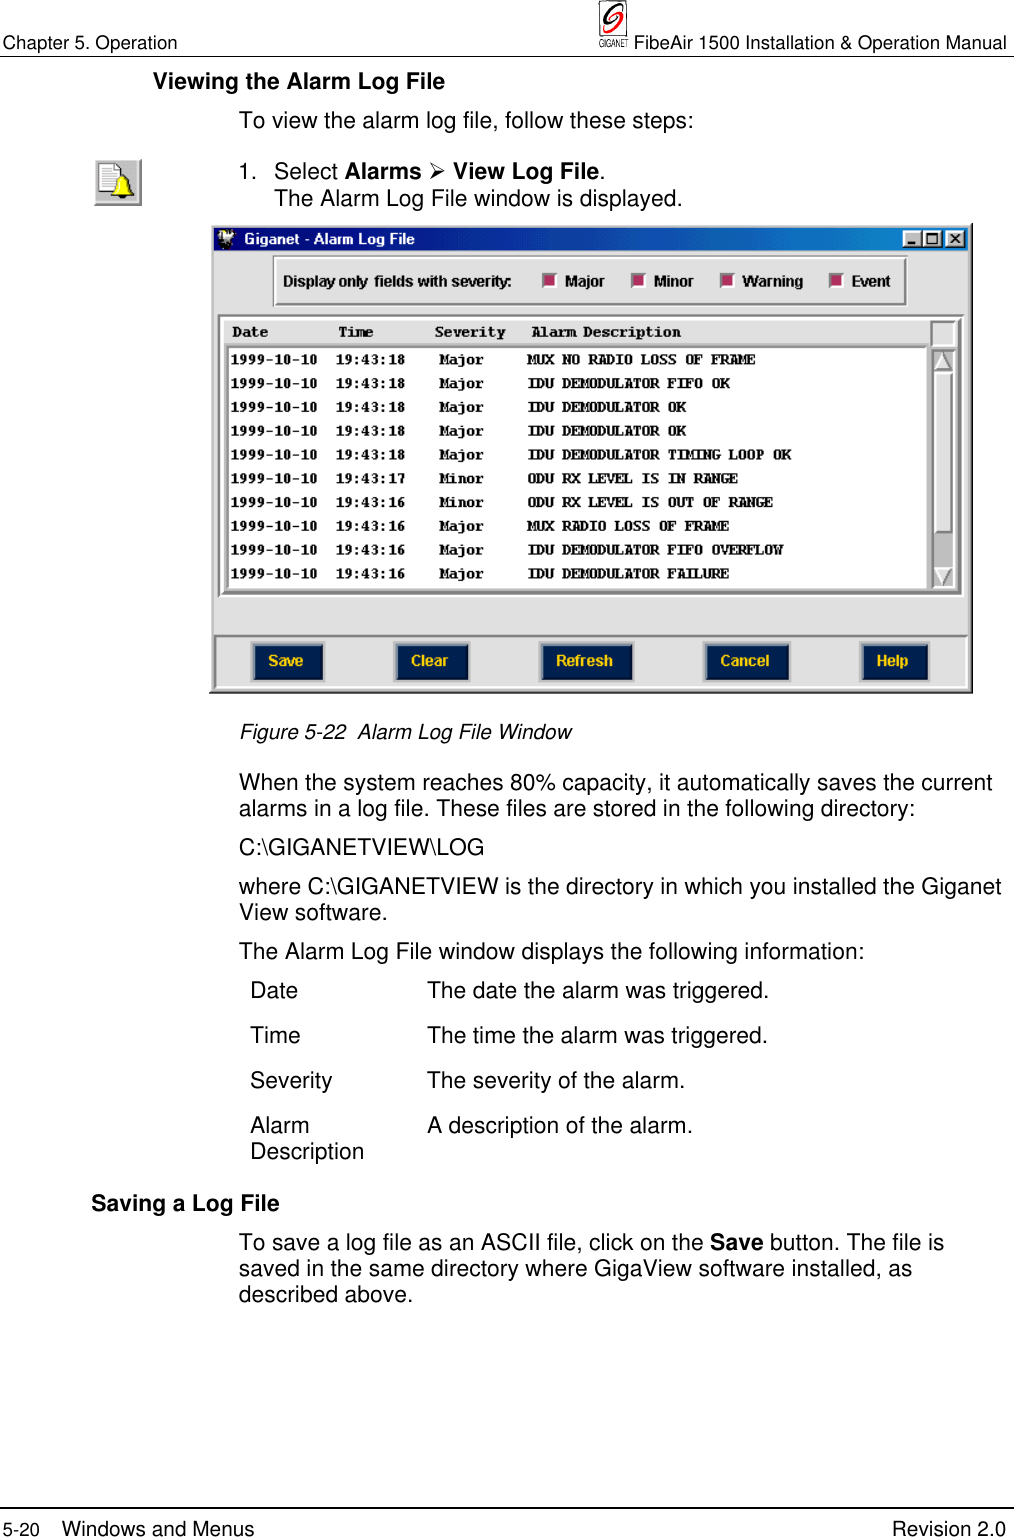 Chapter 5. Operation  FibeAir 1500 Installation &amp; Operation Manual5-20 Windows and Menus Revision 2.0  Viewing the Alarm Log FileTo view the alarm log file, follow these steps:1. Select Alarms ½ View Log File.The Alarm Log File window is displayed.Figure 5-22  Alarm Log File WindowWhen the system reaches 80% capacity, it automatically saves the currentalarms in a log file. These files are stored in the following directory:C:\GIGANETVIEW\LOGwhere C:\GIGANETVIEW is the directory in which you installed the GiganetView software.The Alarm Log File window displays the following information:Date The date the alarm was triggered.Time The time the alarm was triggered.Severity The severity of the alarm.AlarmDescription A description of the alarm.  Saving a Log FileTo save a log file as an ASCII file, click on the Save button. The file issaved in the same directory where GigaView software installed, asdescribed above.